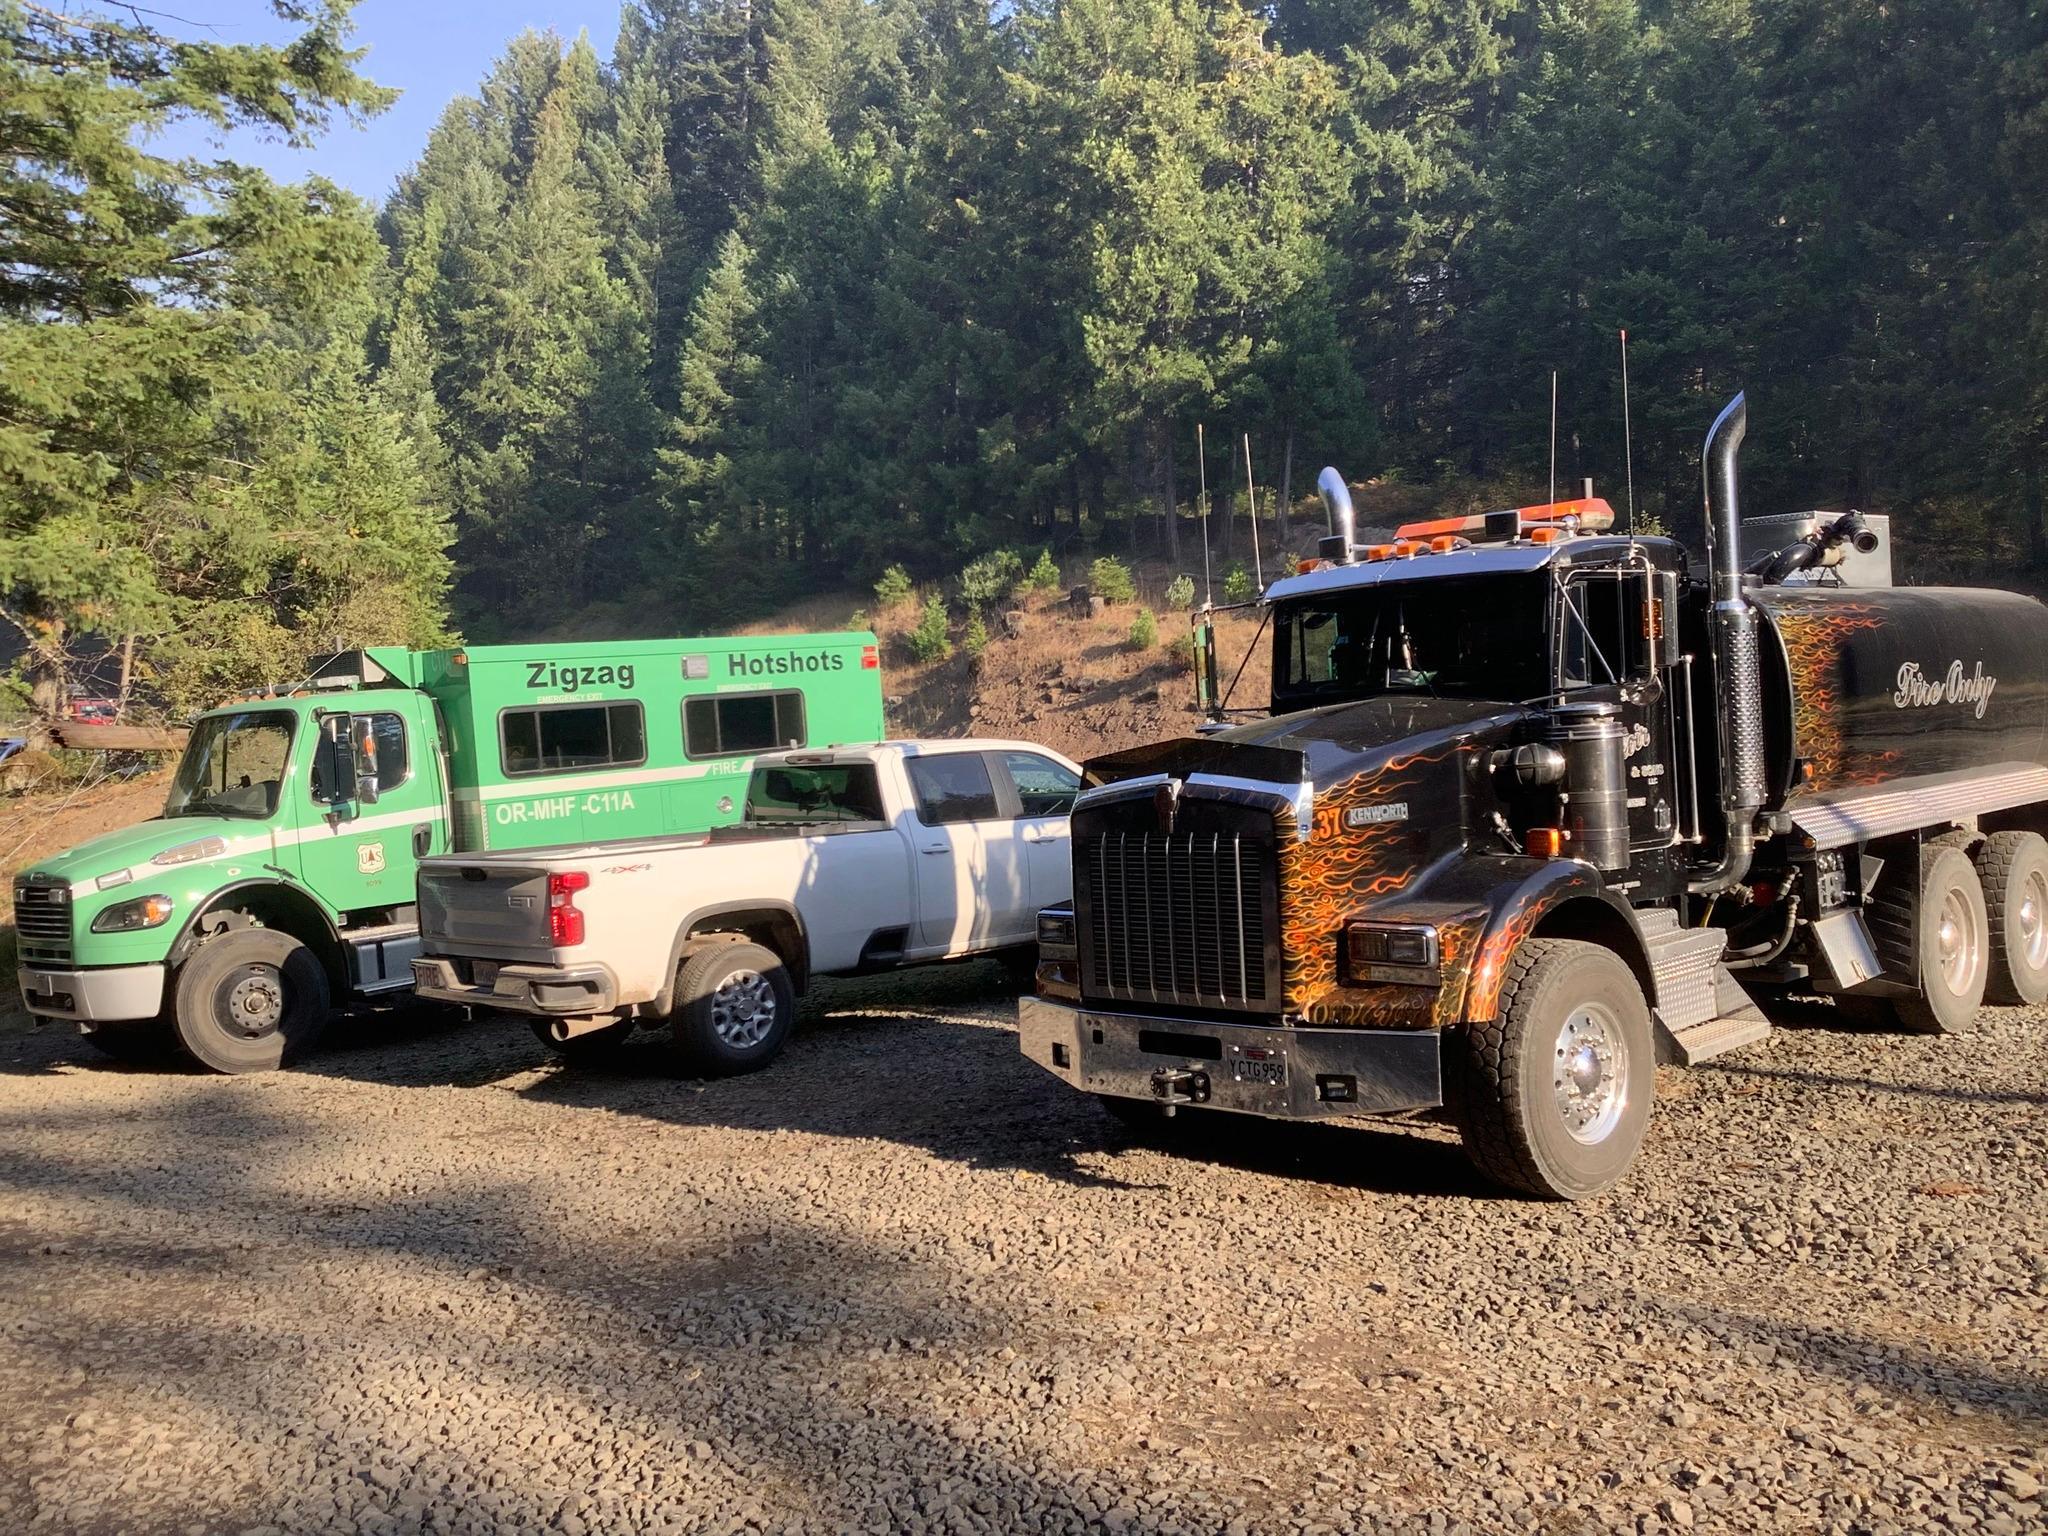 Vehicles parked in a gravel parking lot surround by trees.  Vehicles are a green buggy transport, white pickup truck, and a black water tender.